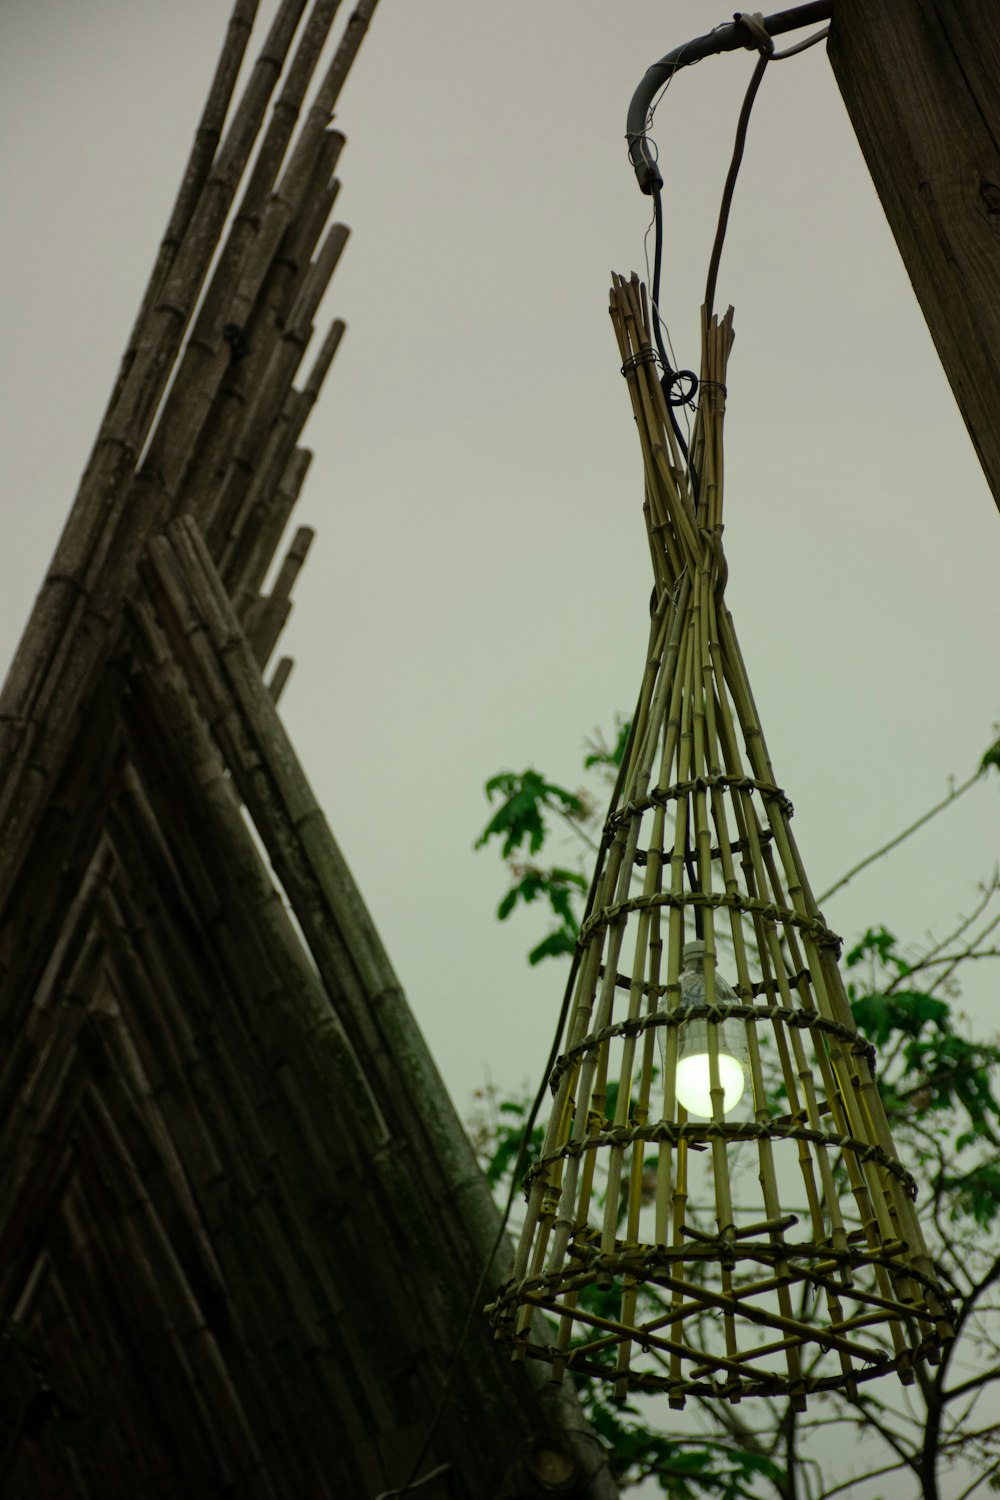 a close up of a bamboo basket hanging from a pole